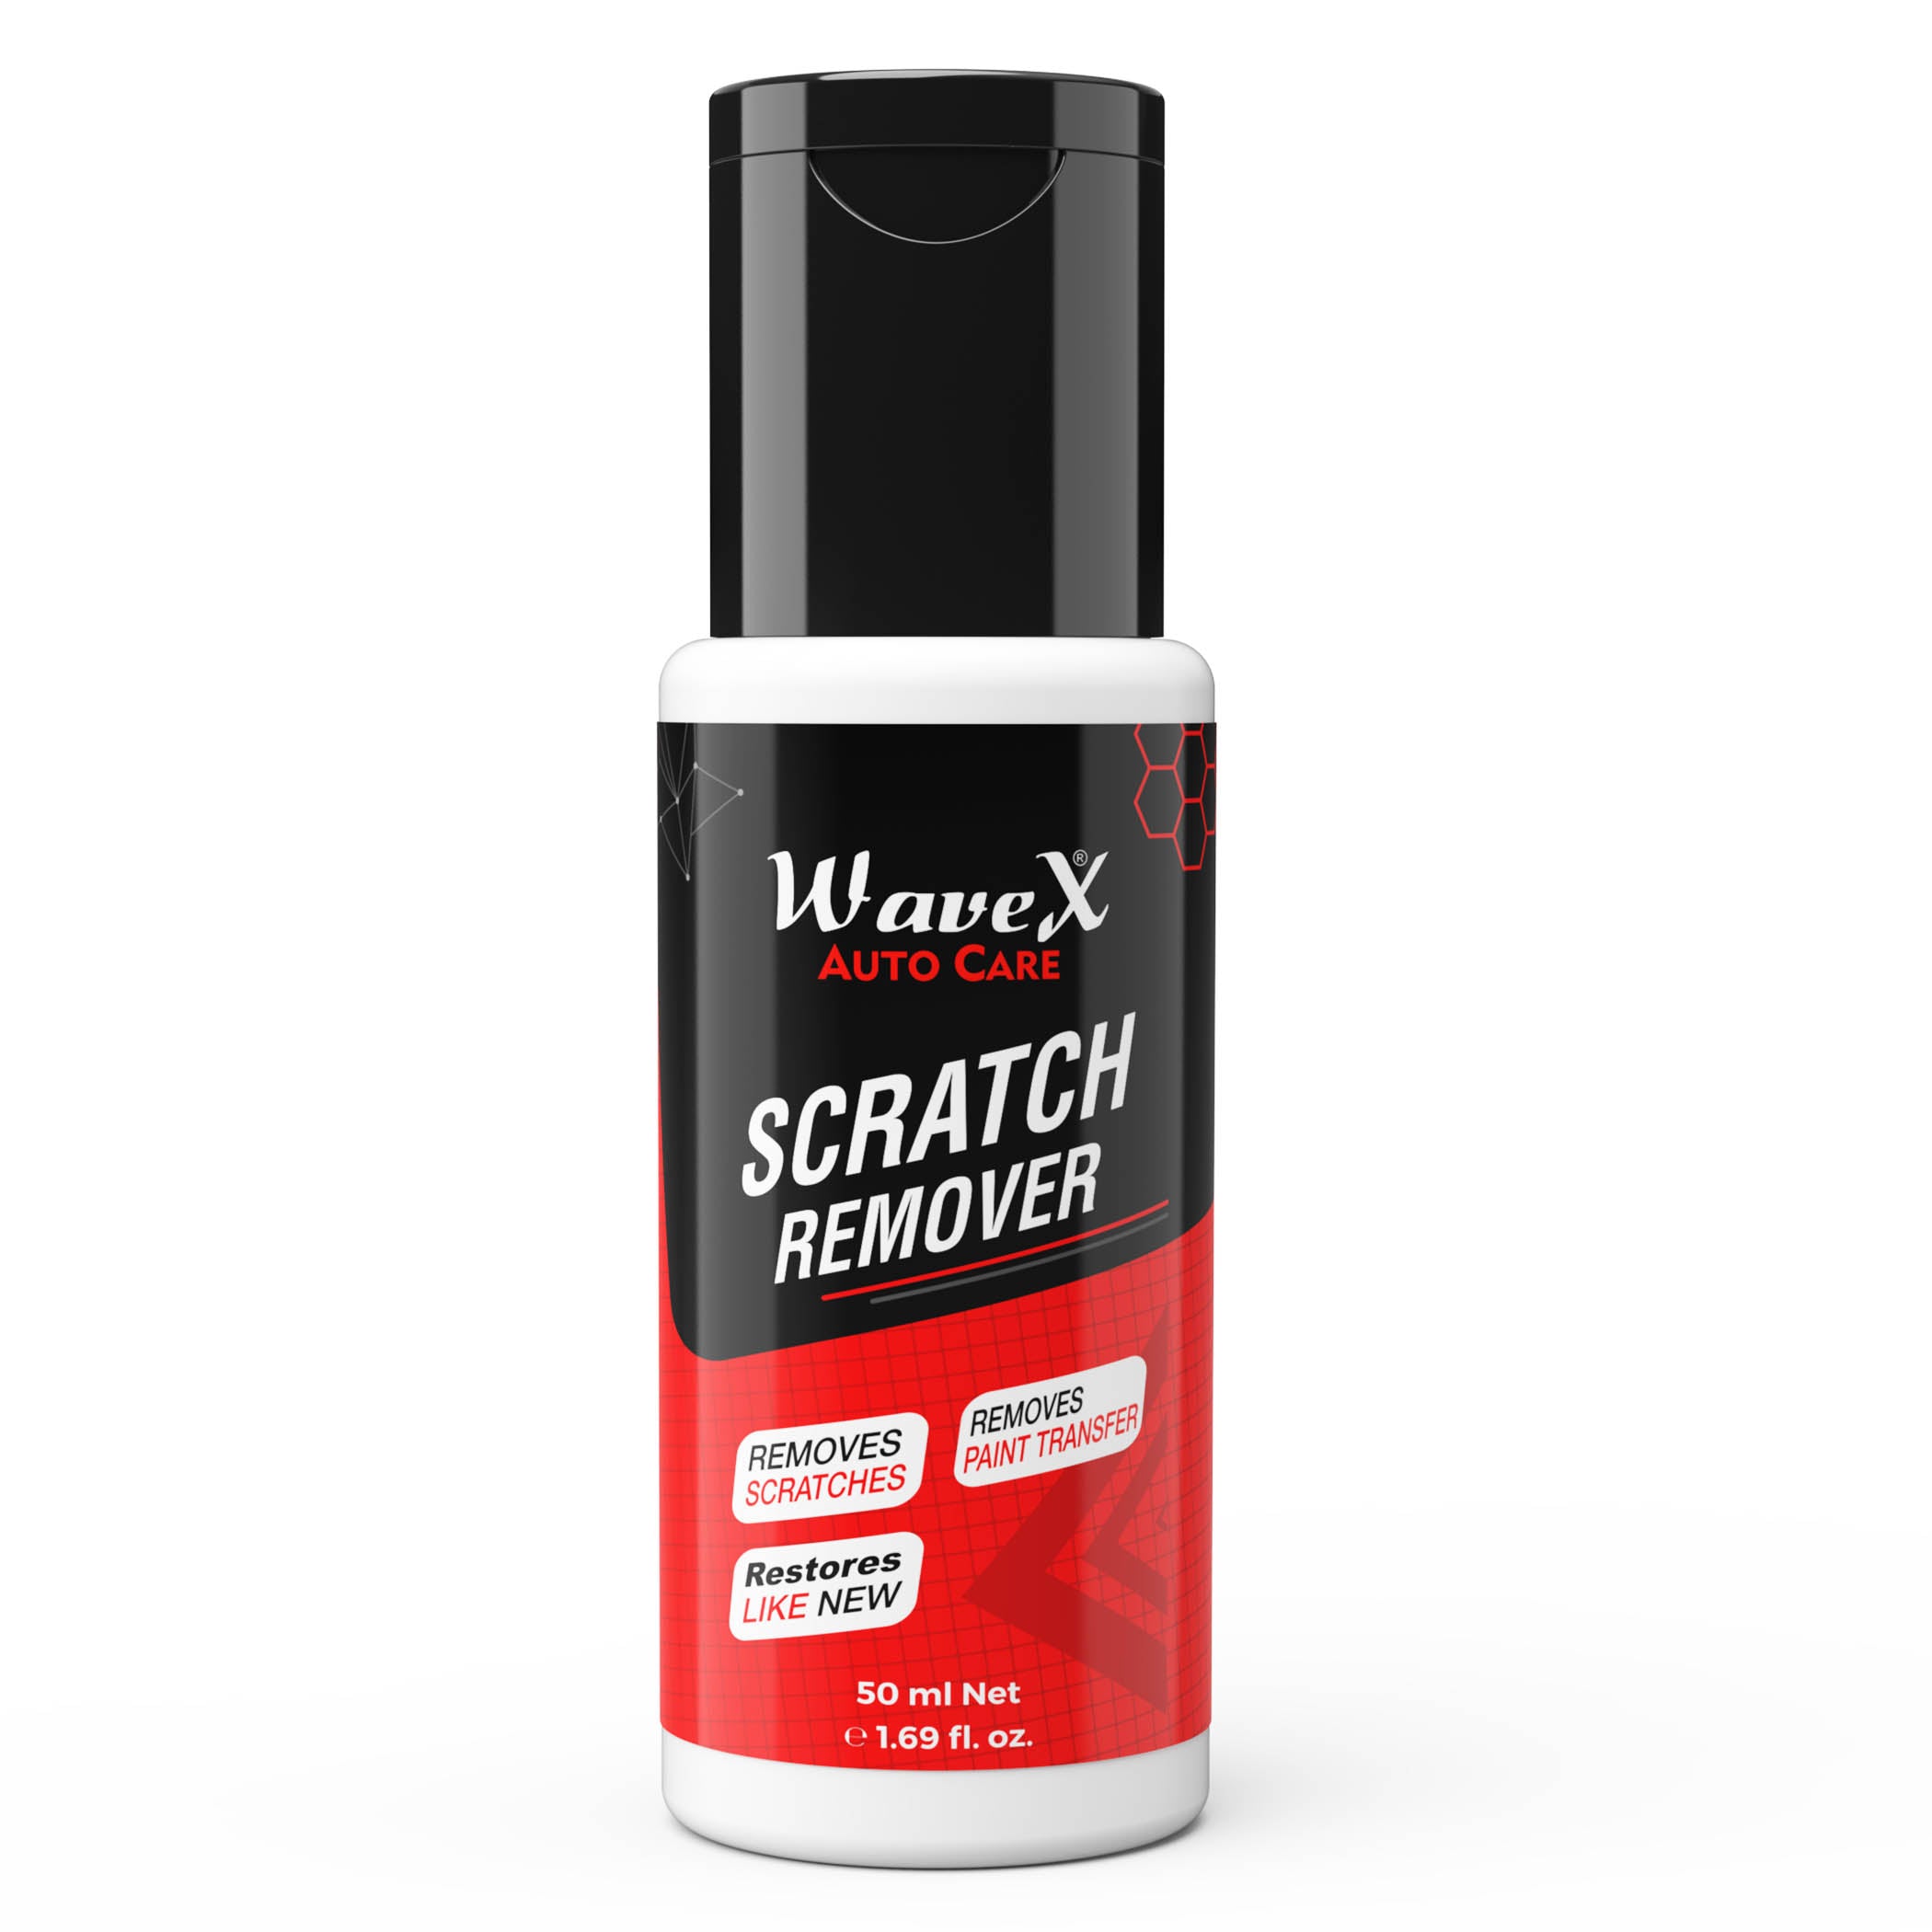 Car Scratch Remover 50ml  Removes Paint Transfer, Restores Like New – Wavex